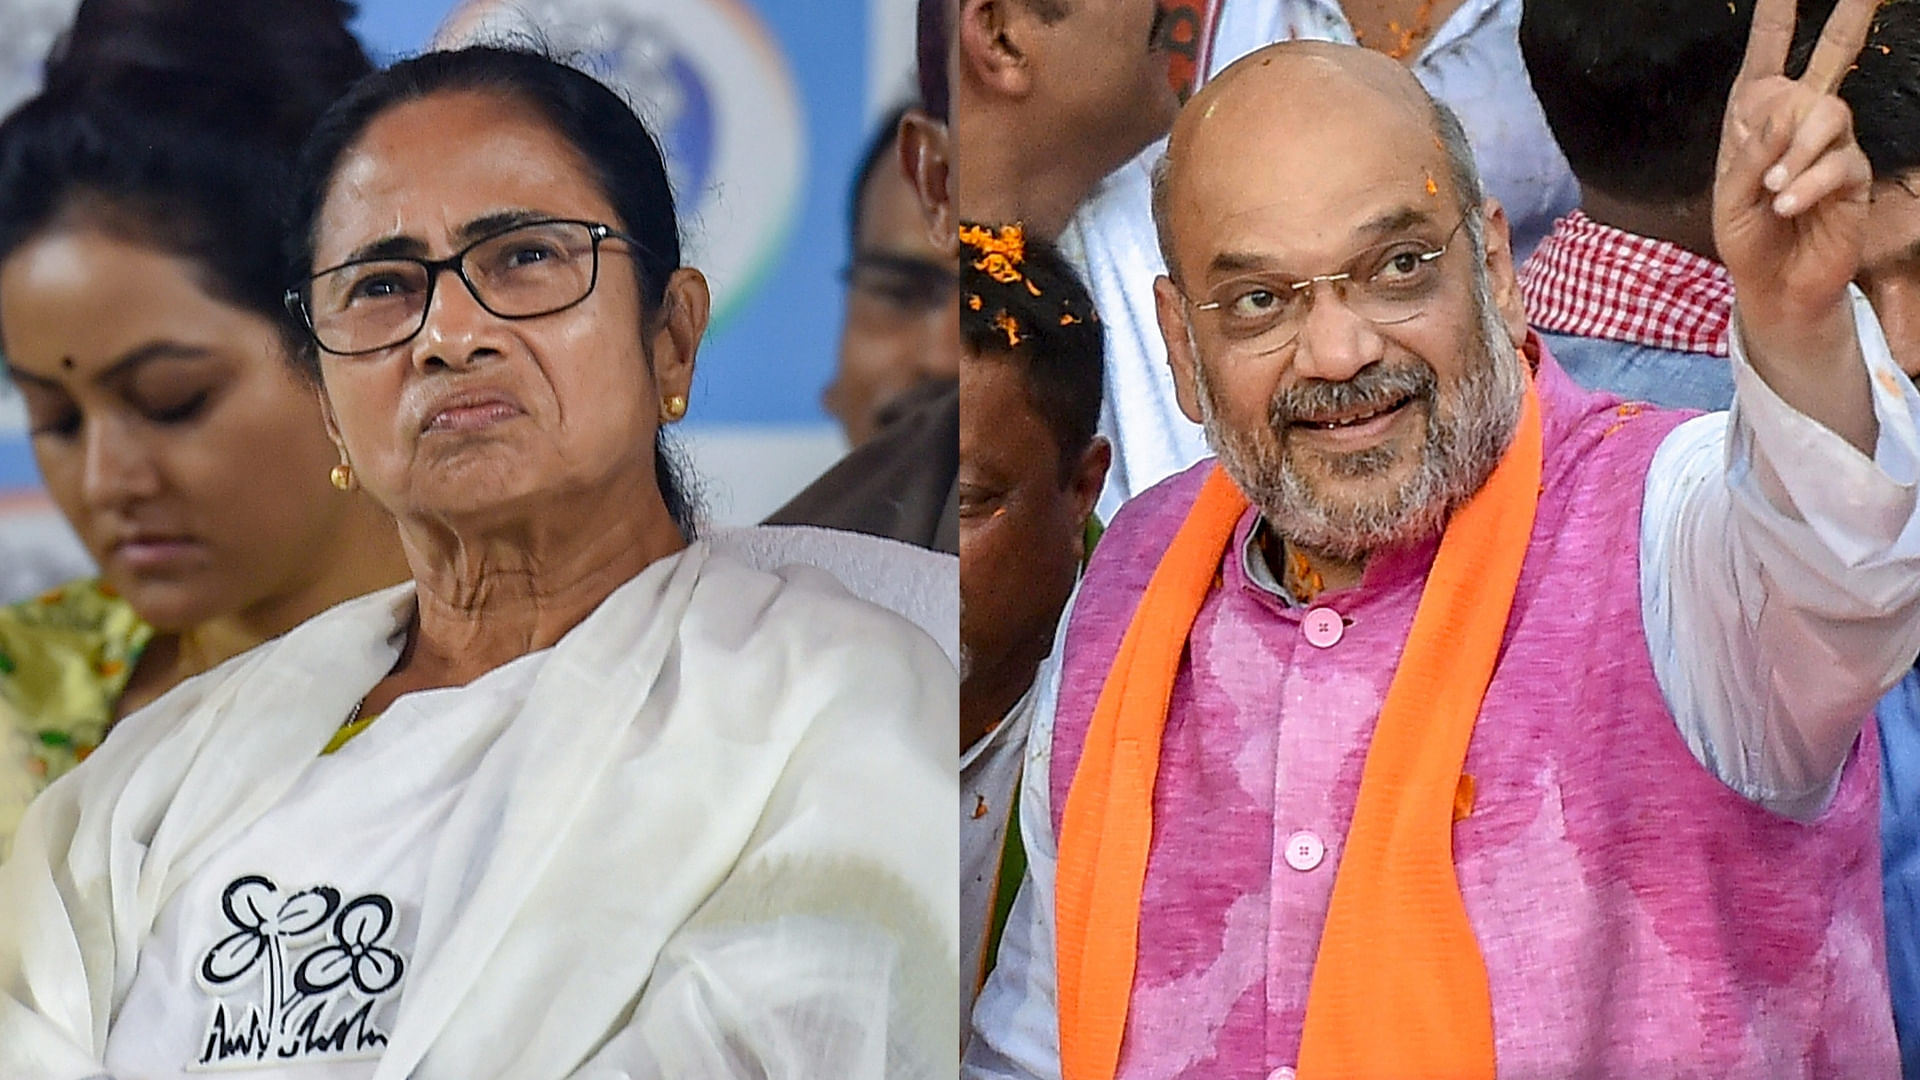  <p>West Bengal Chief Minister Mamata Banerjee and Union Home Minister Amit Shah.</p>